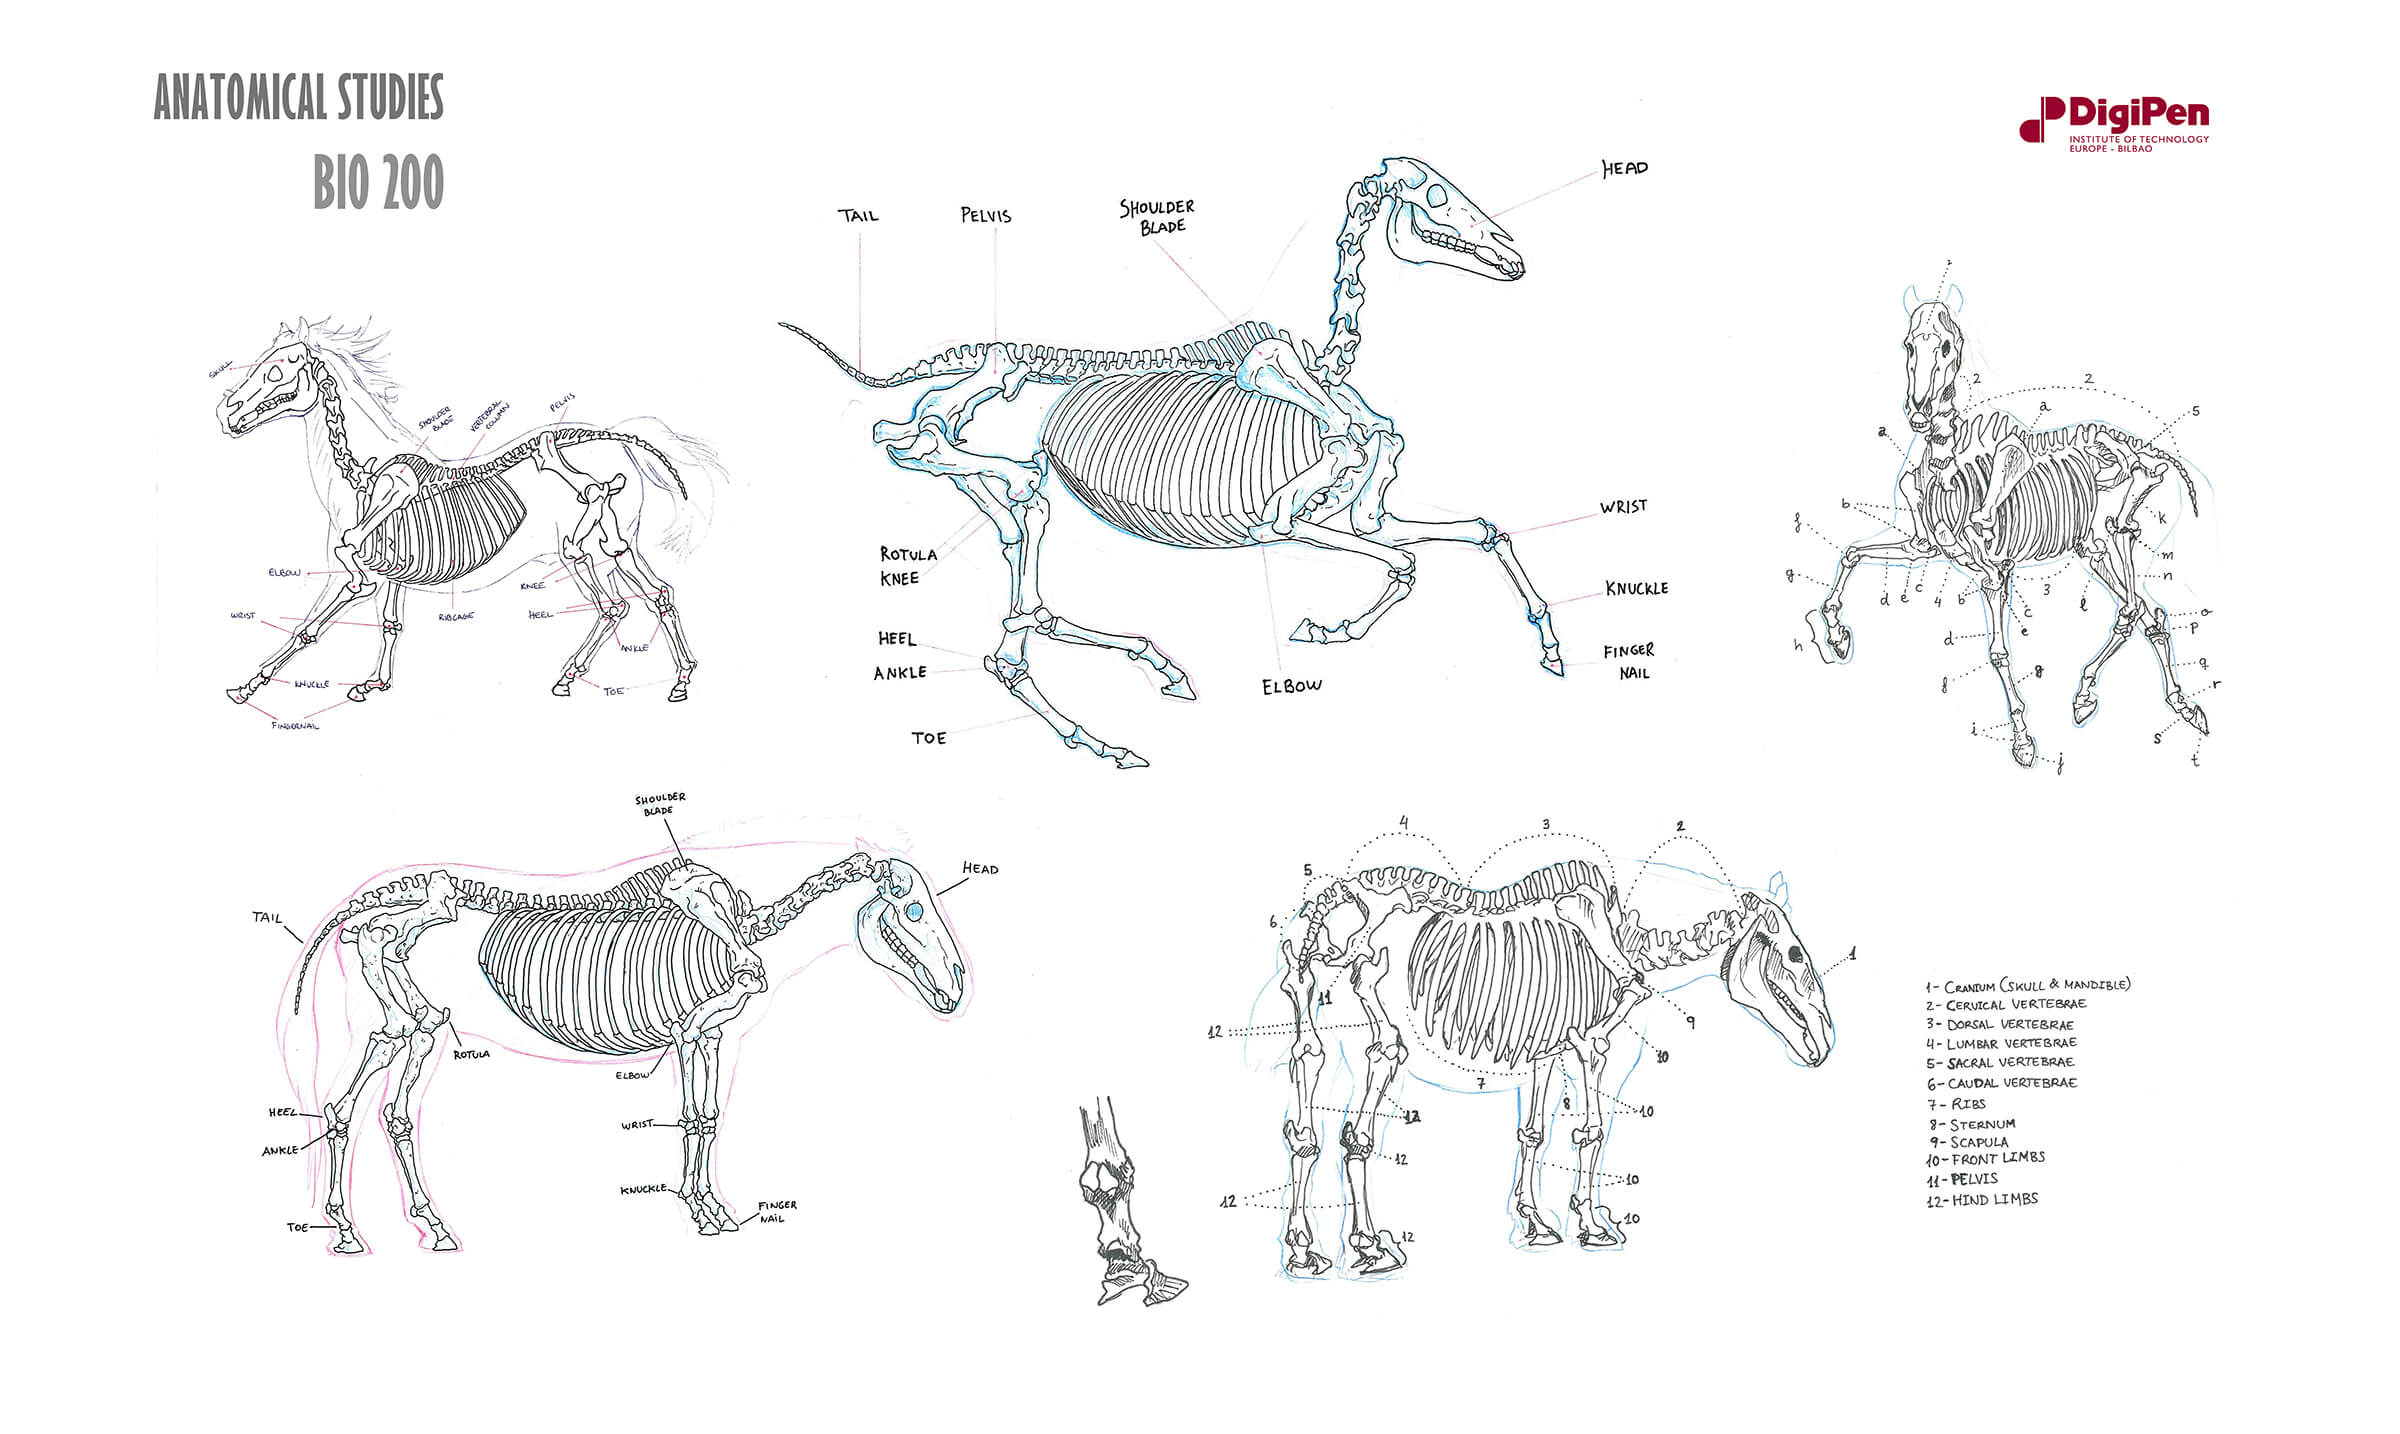 Black-and-white sketches of a horse&#039;s skeletal system both while standing still, and moving at a gallop and trot.